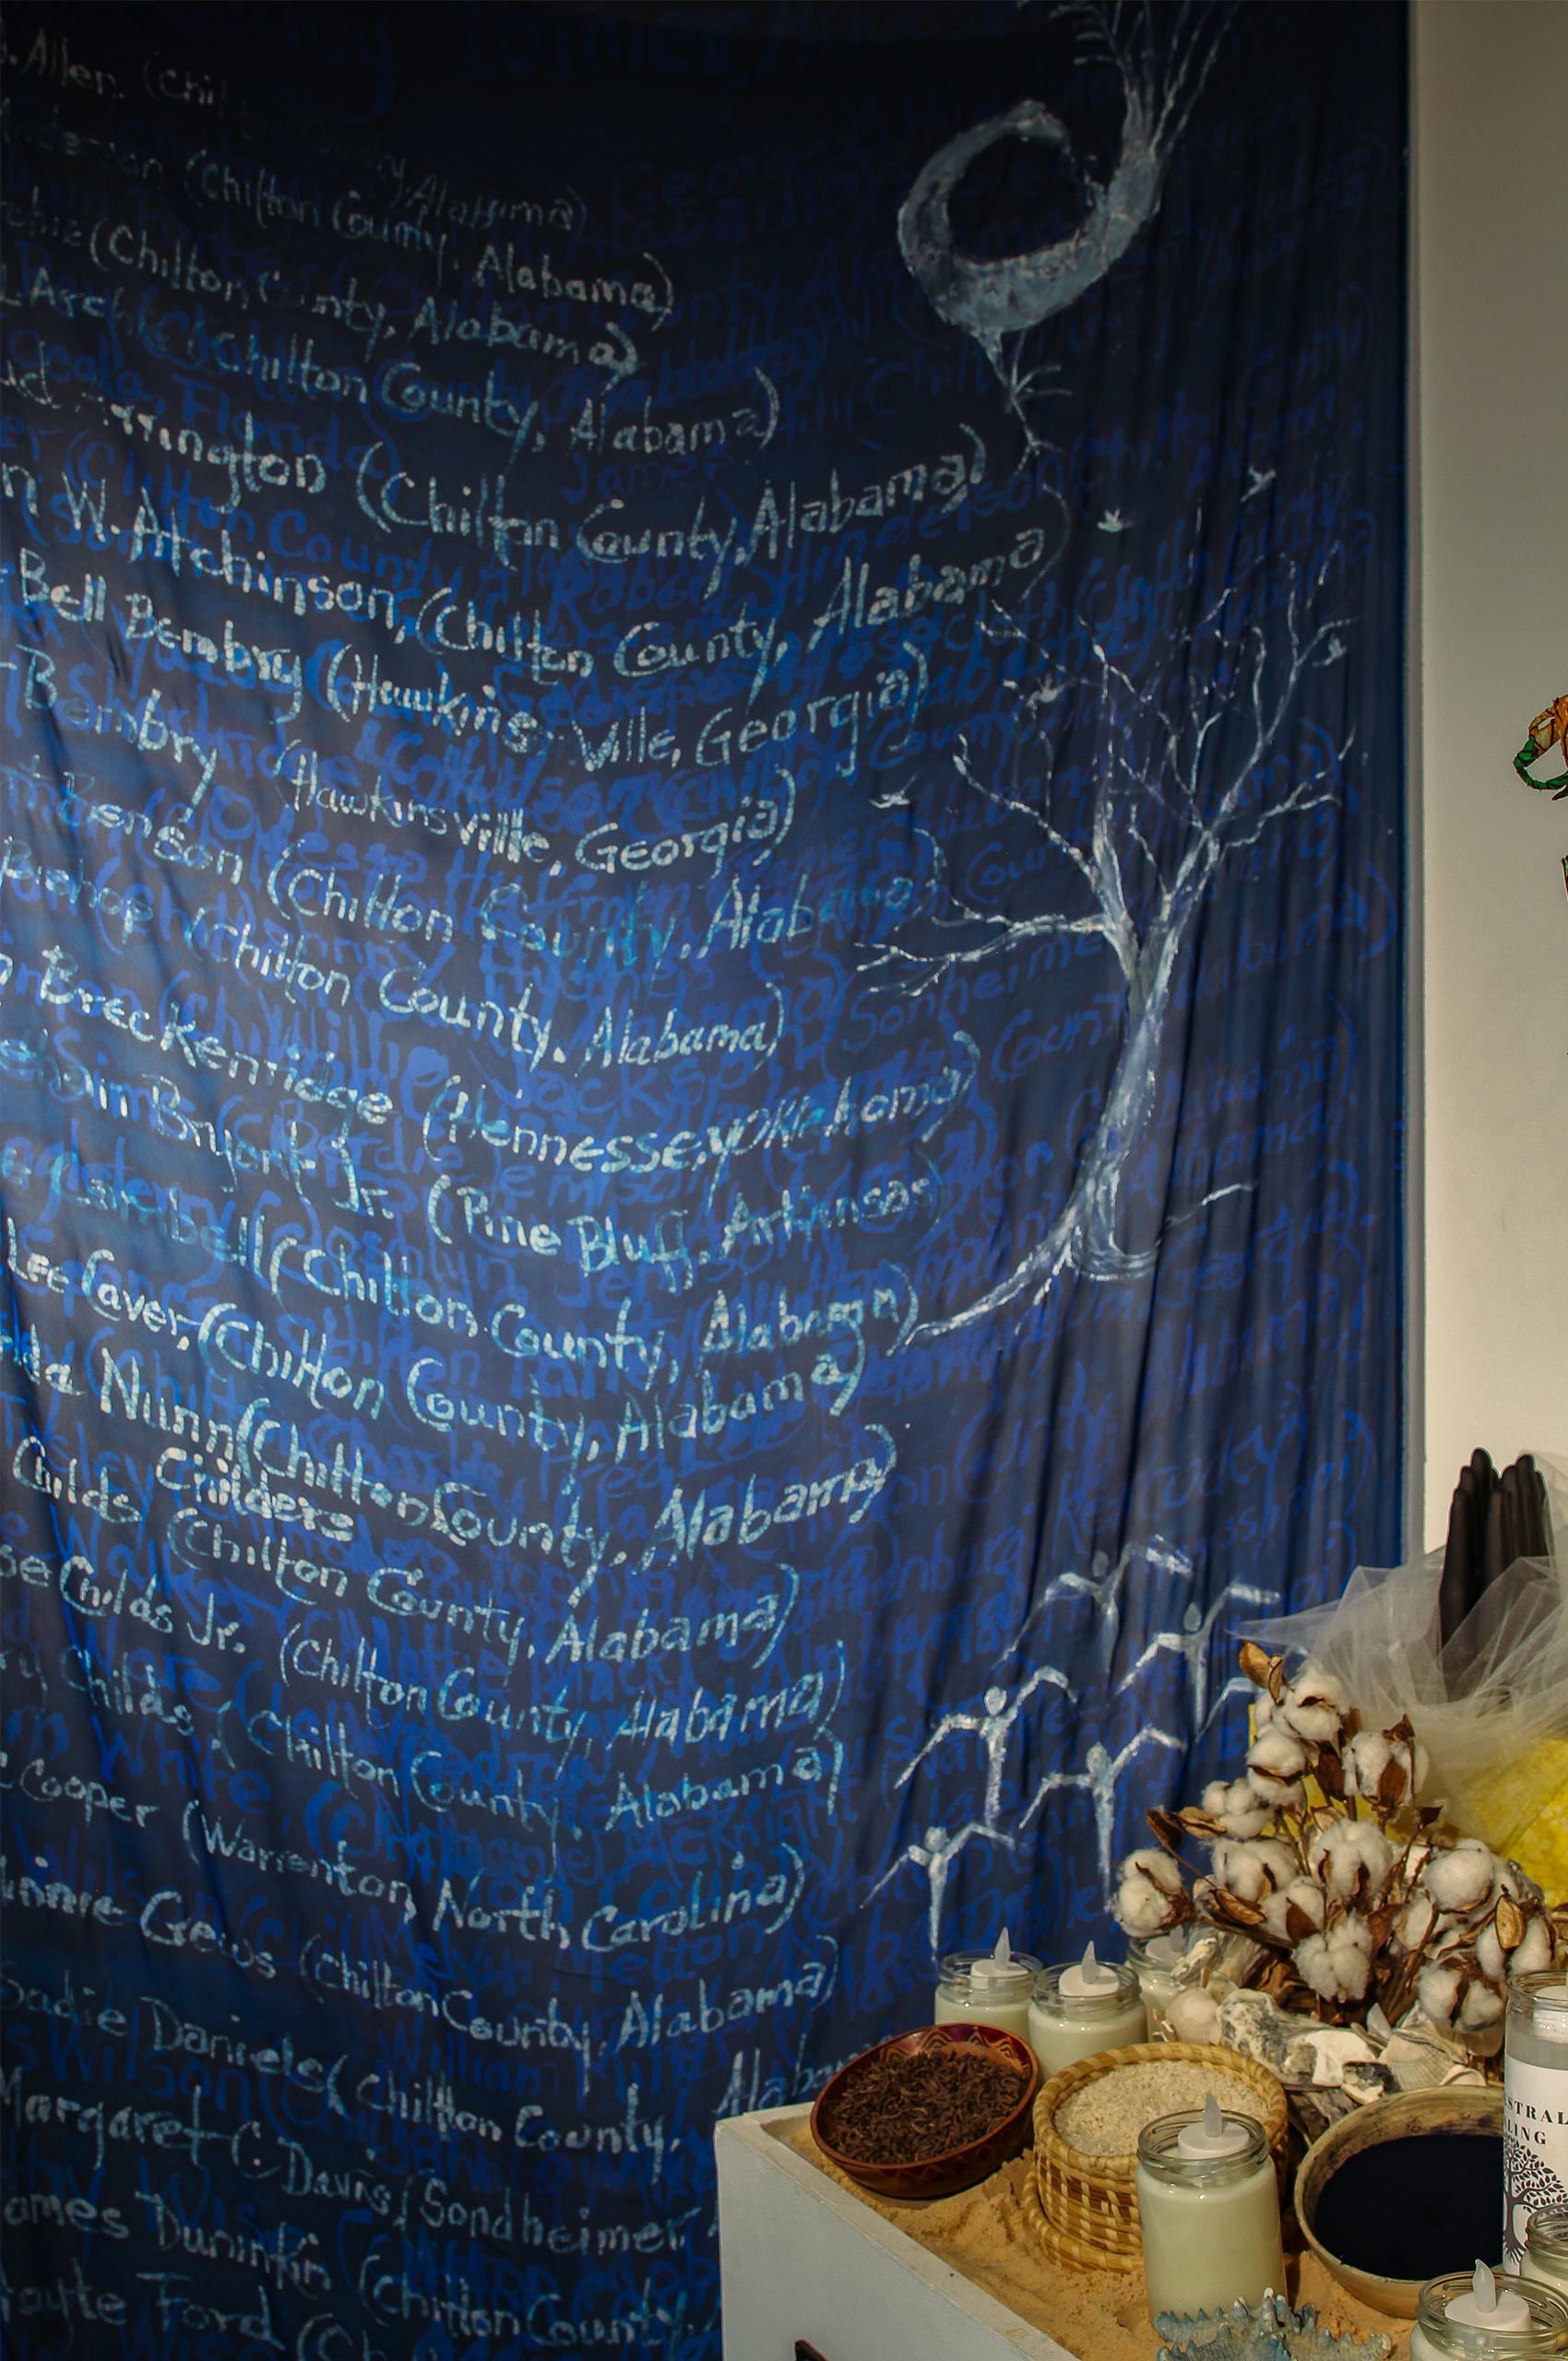 A blue curtain hangs from a wall displaying names along with counties and state names and illustrations of a tree and people March 2022.